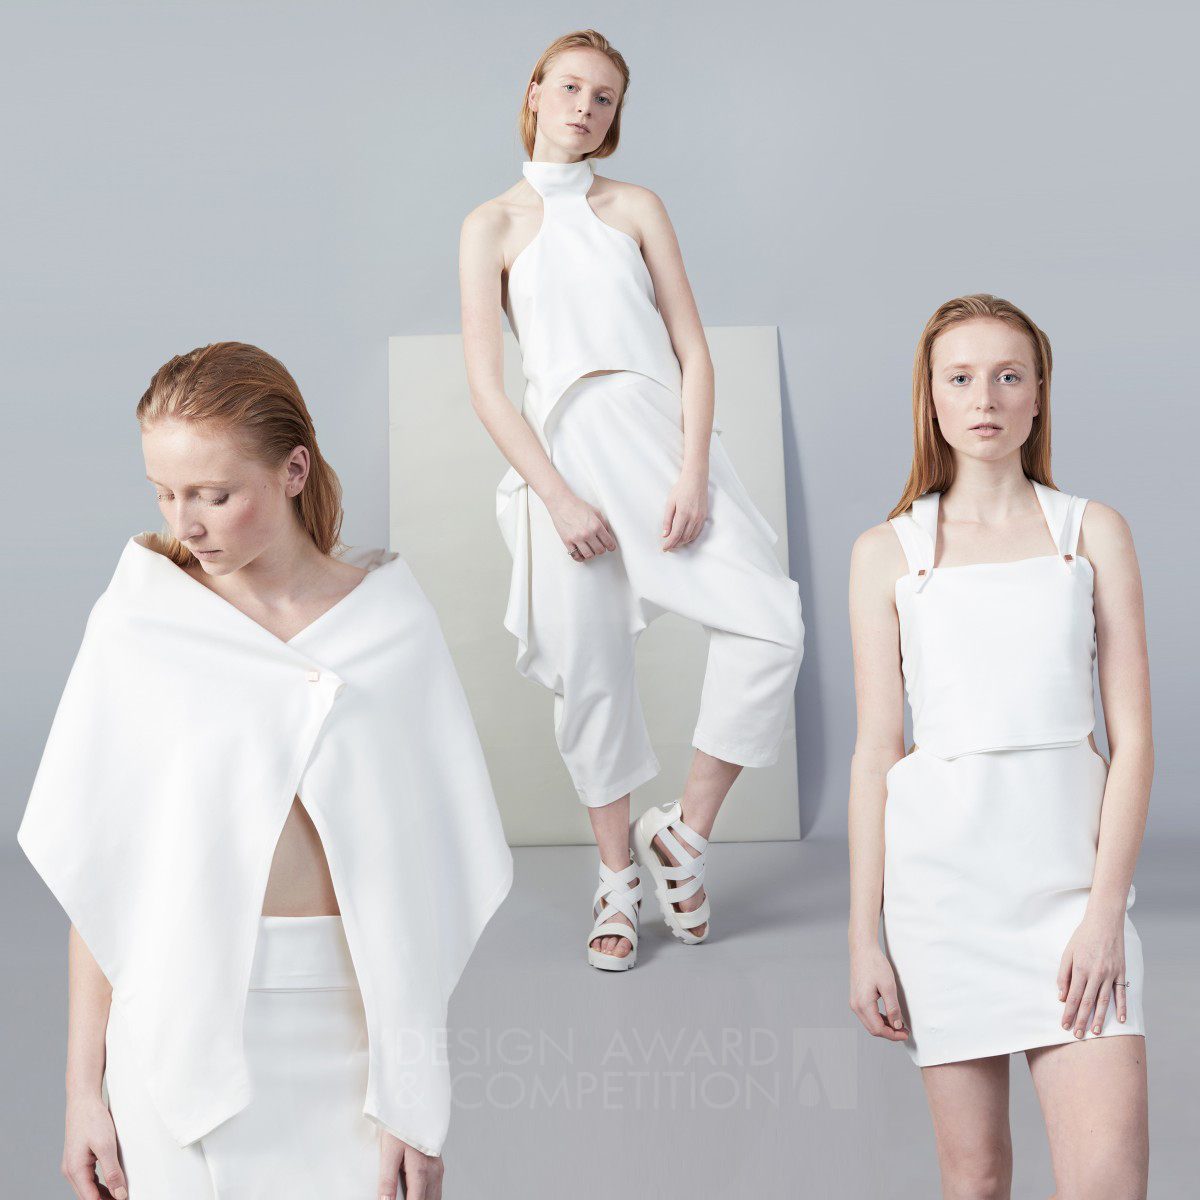 Omdanne Convertible Biodegradable Clothing